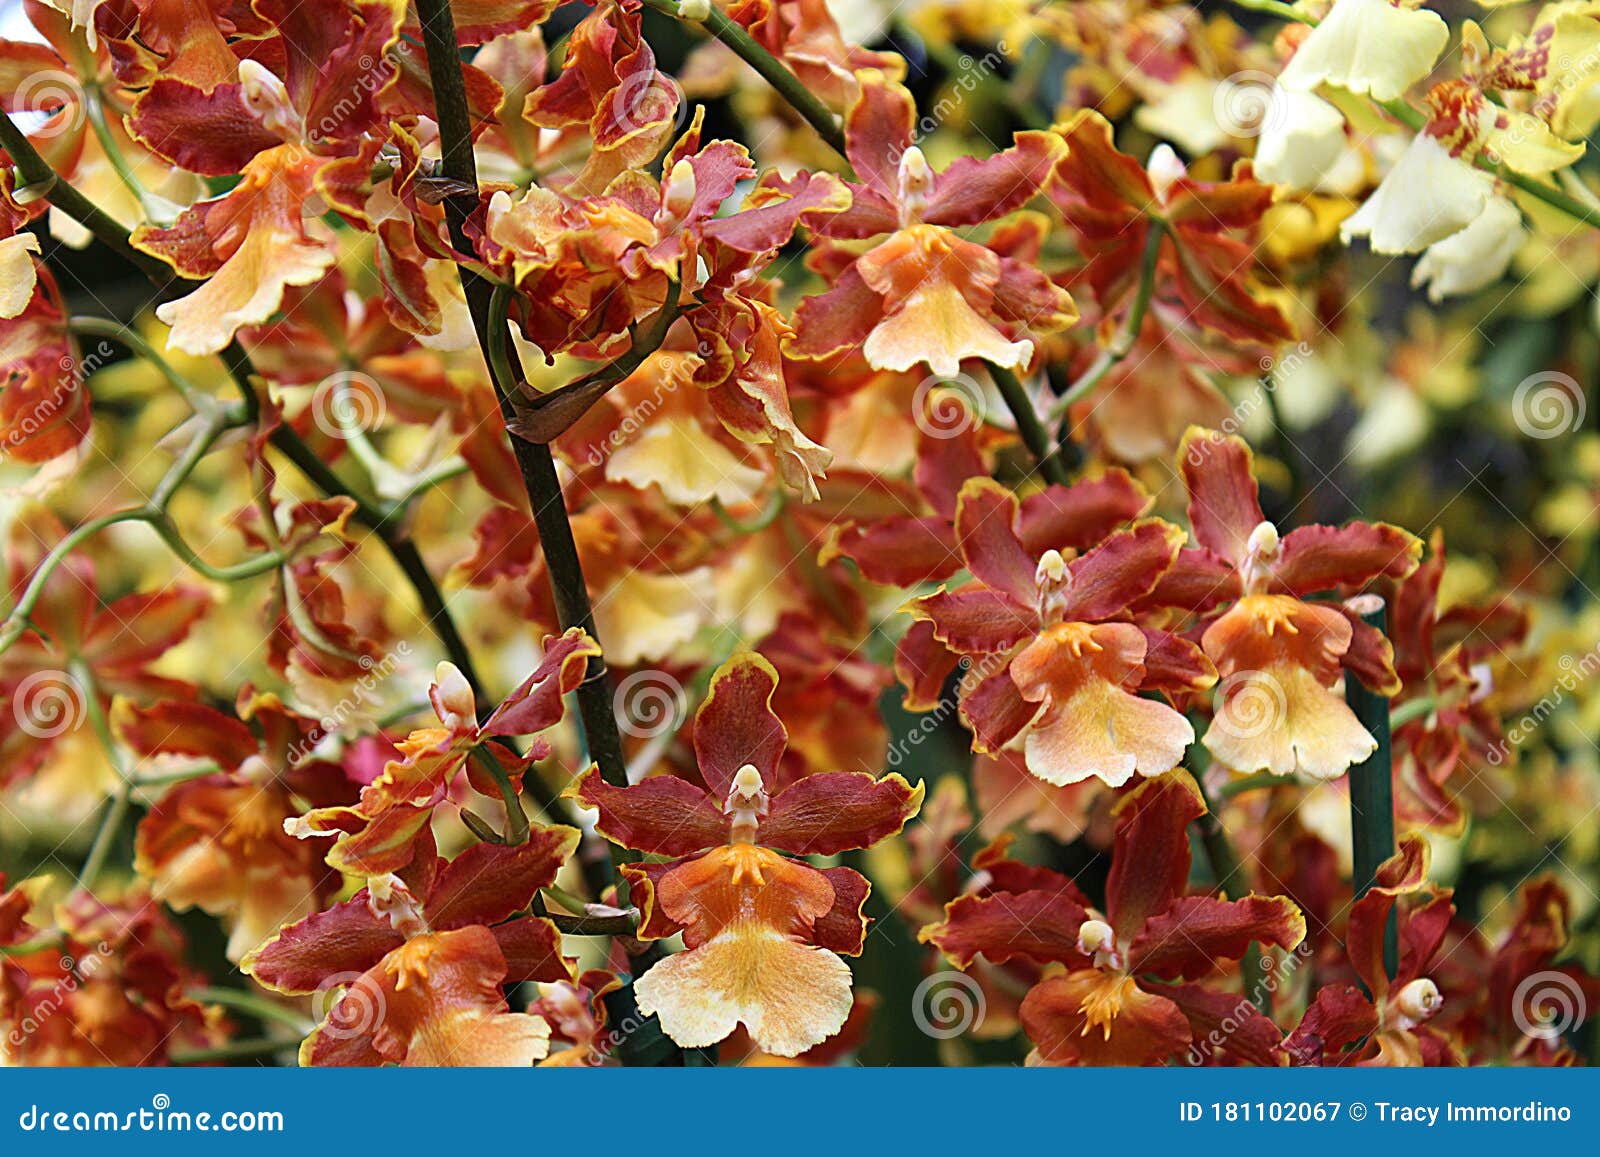 A Profusion Of Brown Orange And Yellow Oncidium Orchid Flowers Stock Image Image Of Oncidium Blooming 181102067